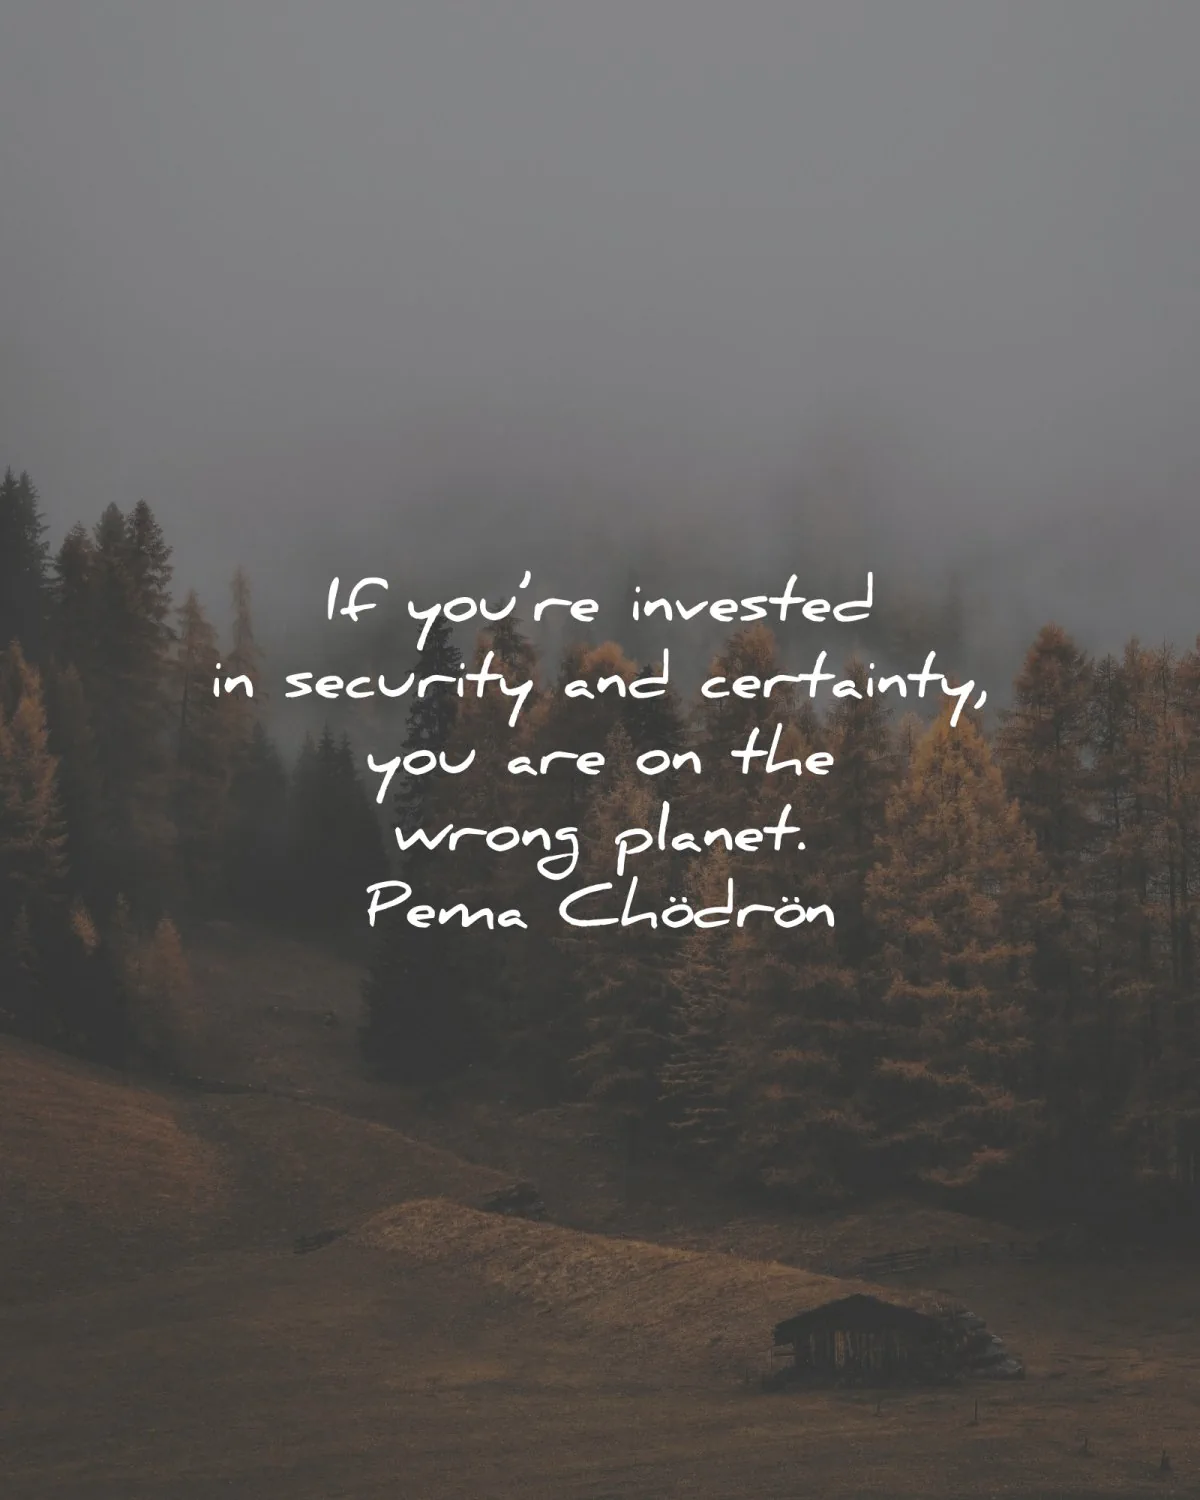 pema chodron quotes invested security certainty wrong planet wisdom